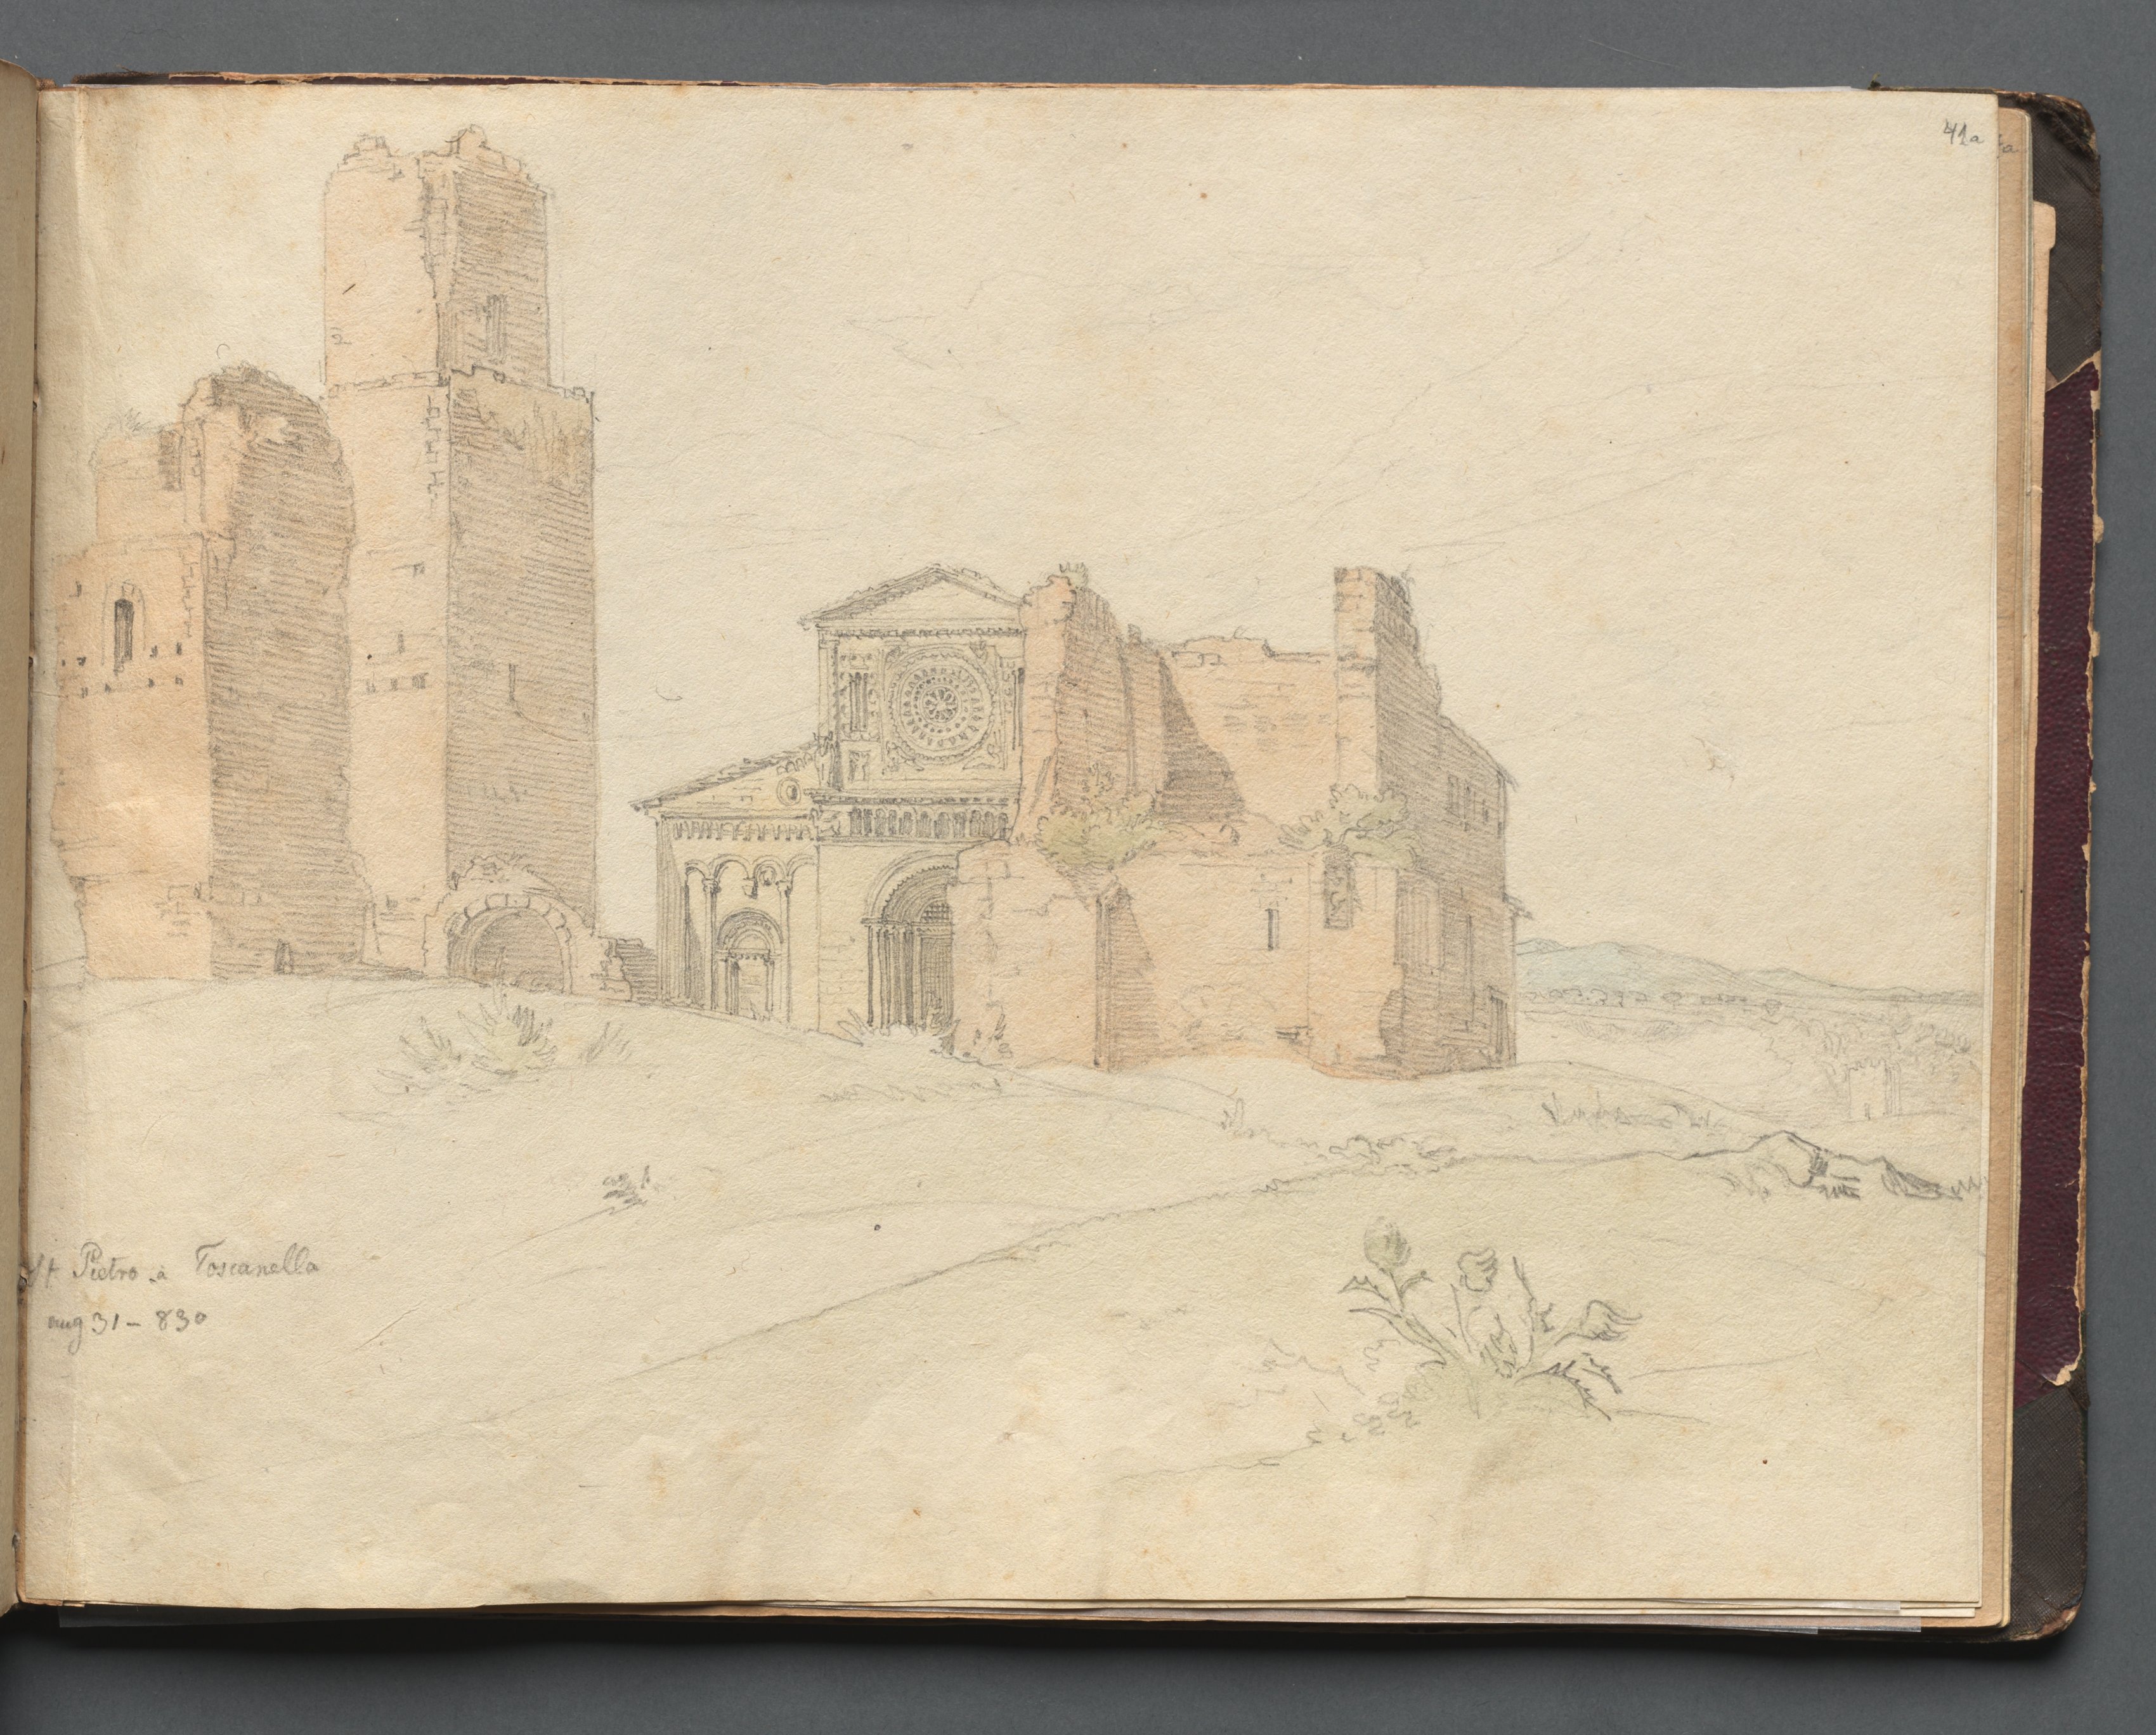 Album with Views of Rome and Surroundings, Landscape Studies, page 41a: "St. Pietro, Toscanella"